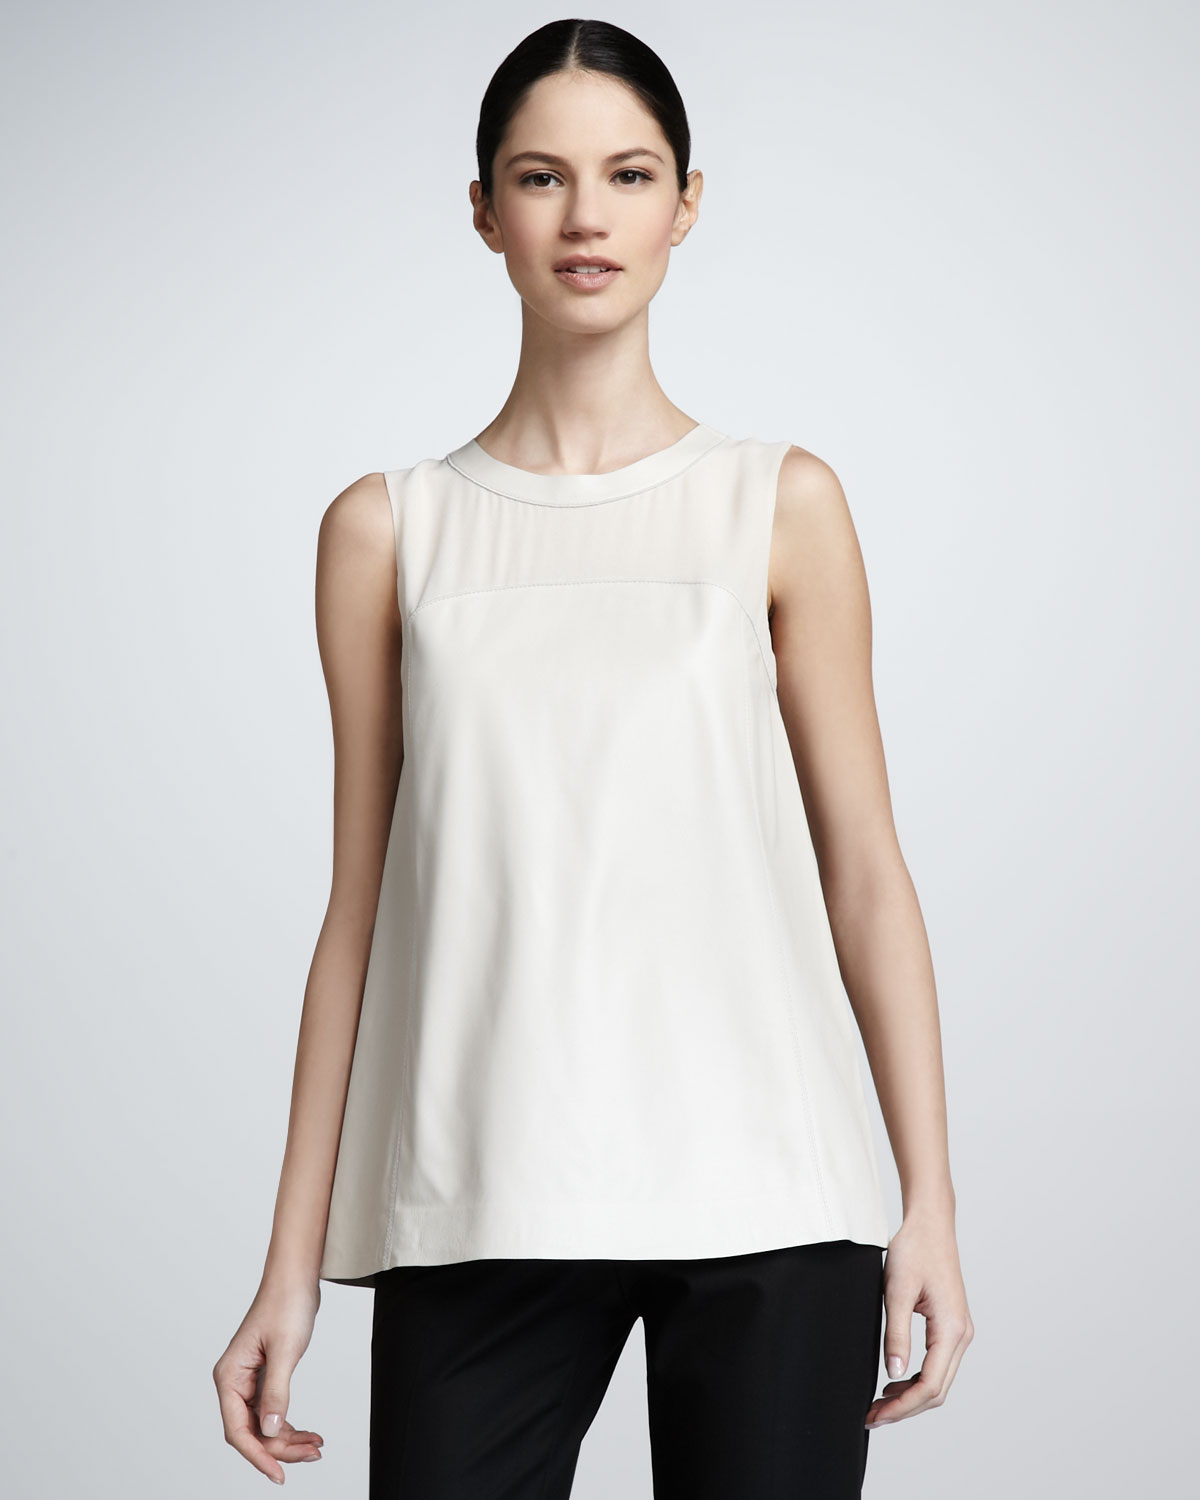 Lyst - Lafayette 148 new york Yoked Leather Swing Top in White